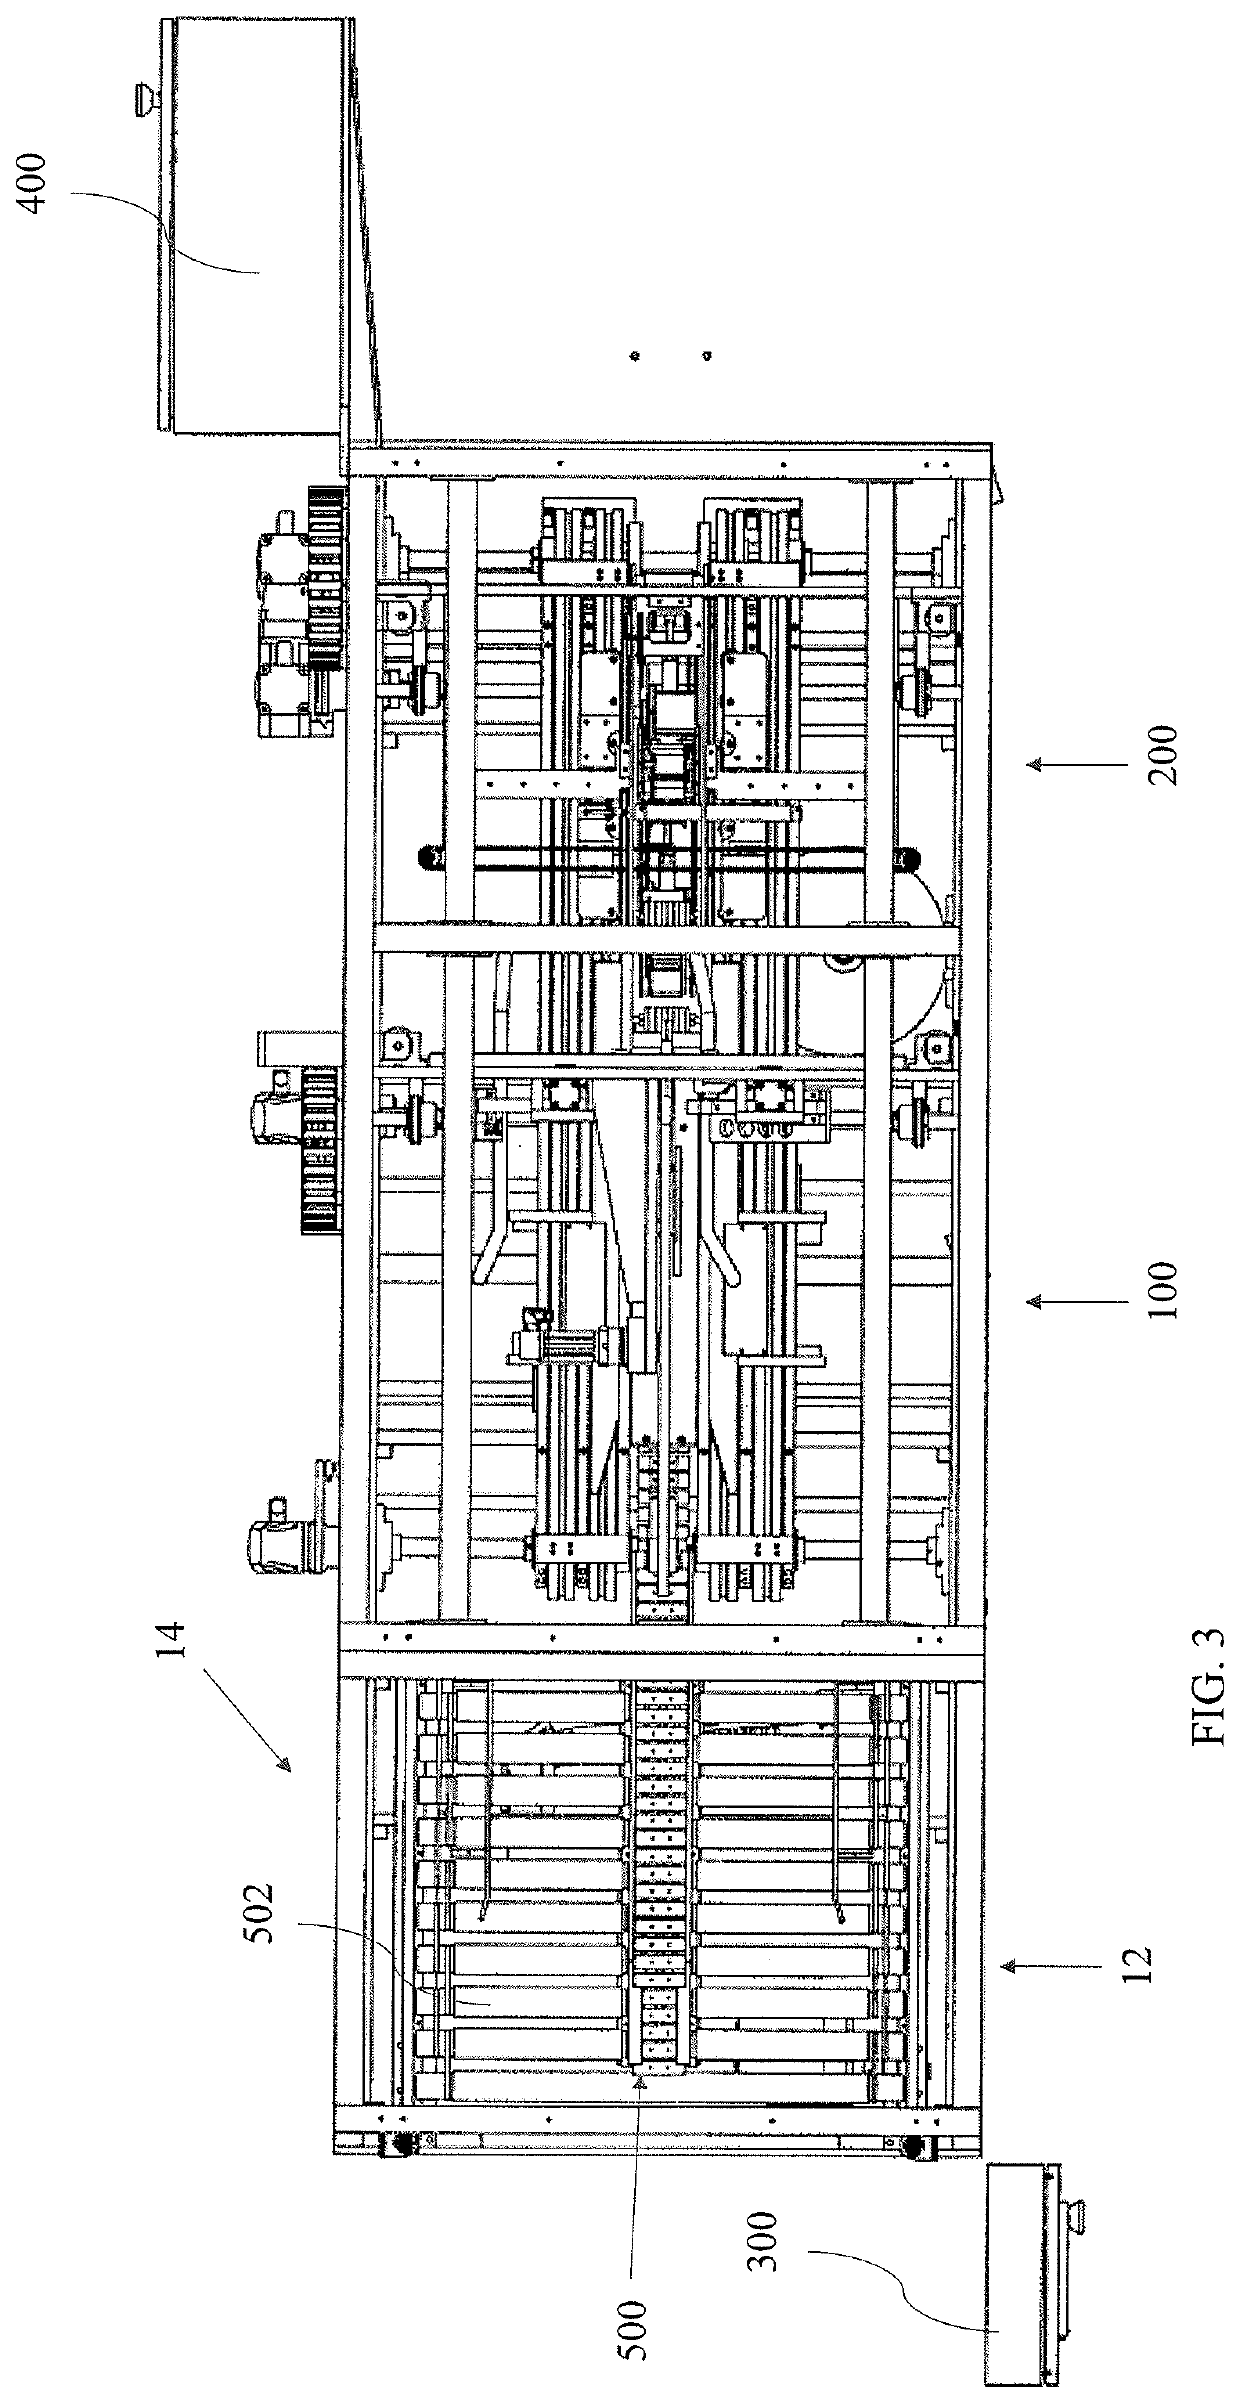 Packaging machinery having automated adjustments based on package parameters